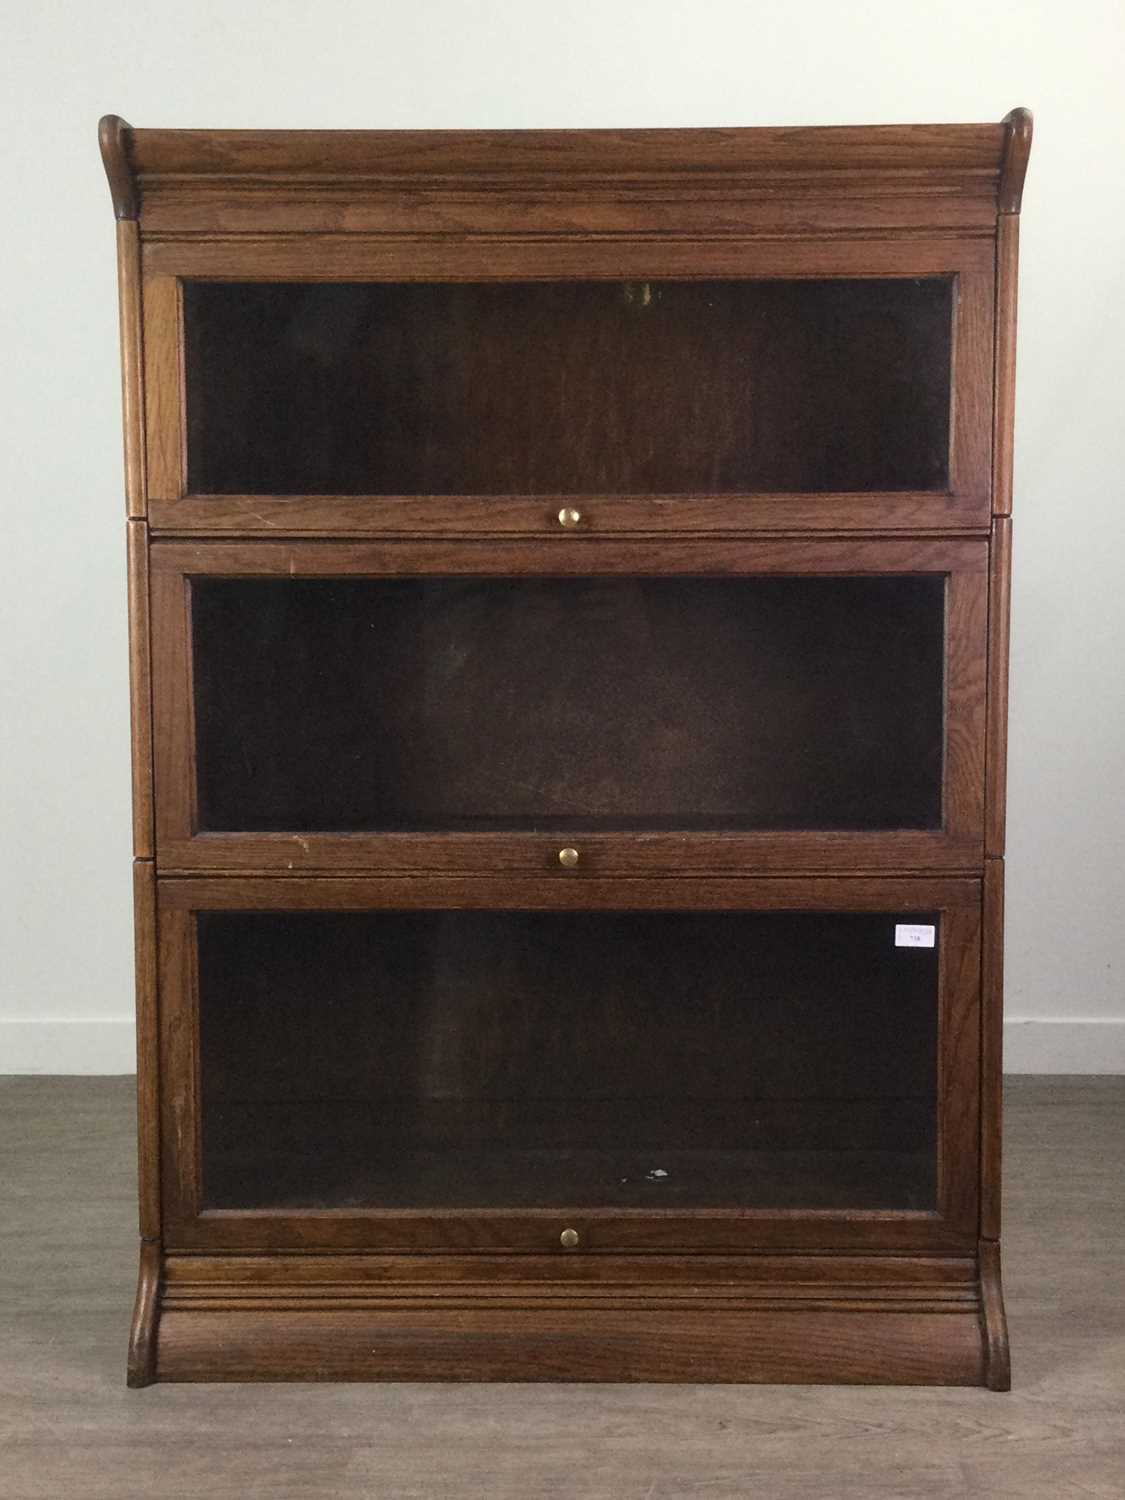 Lot 730 - AN EARLY 20TH CENTURY OAK SECTIONAL BOOKCASE